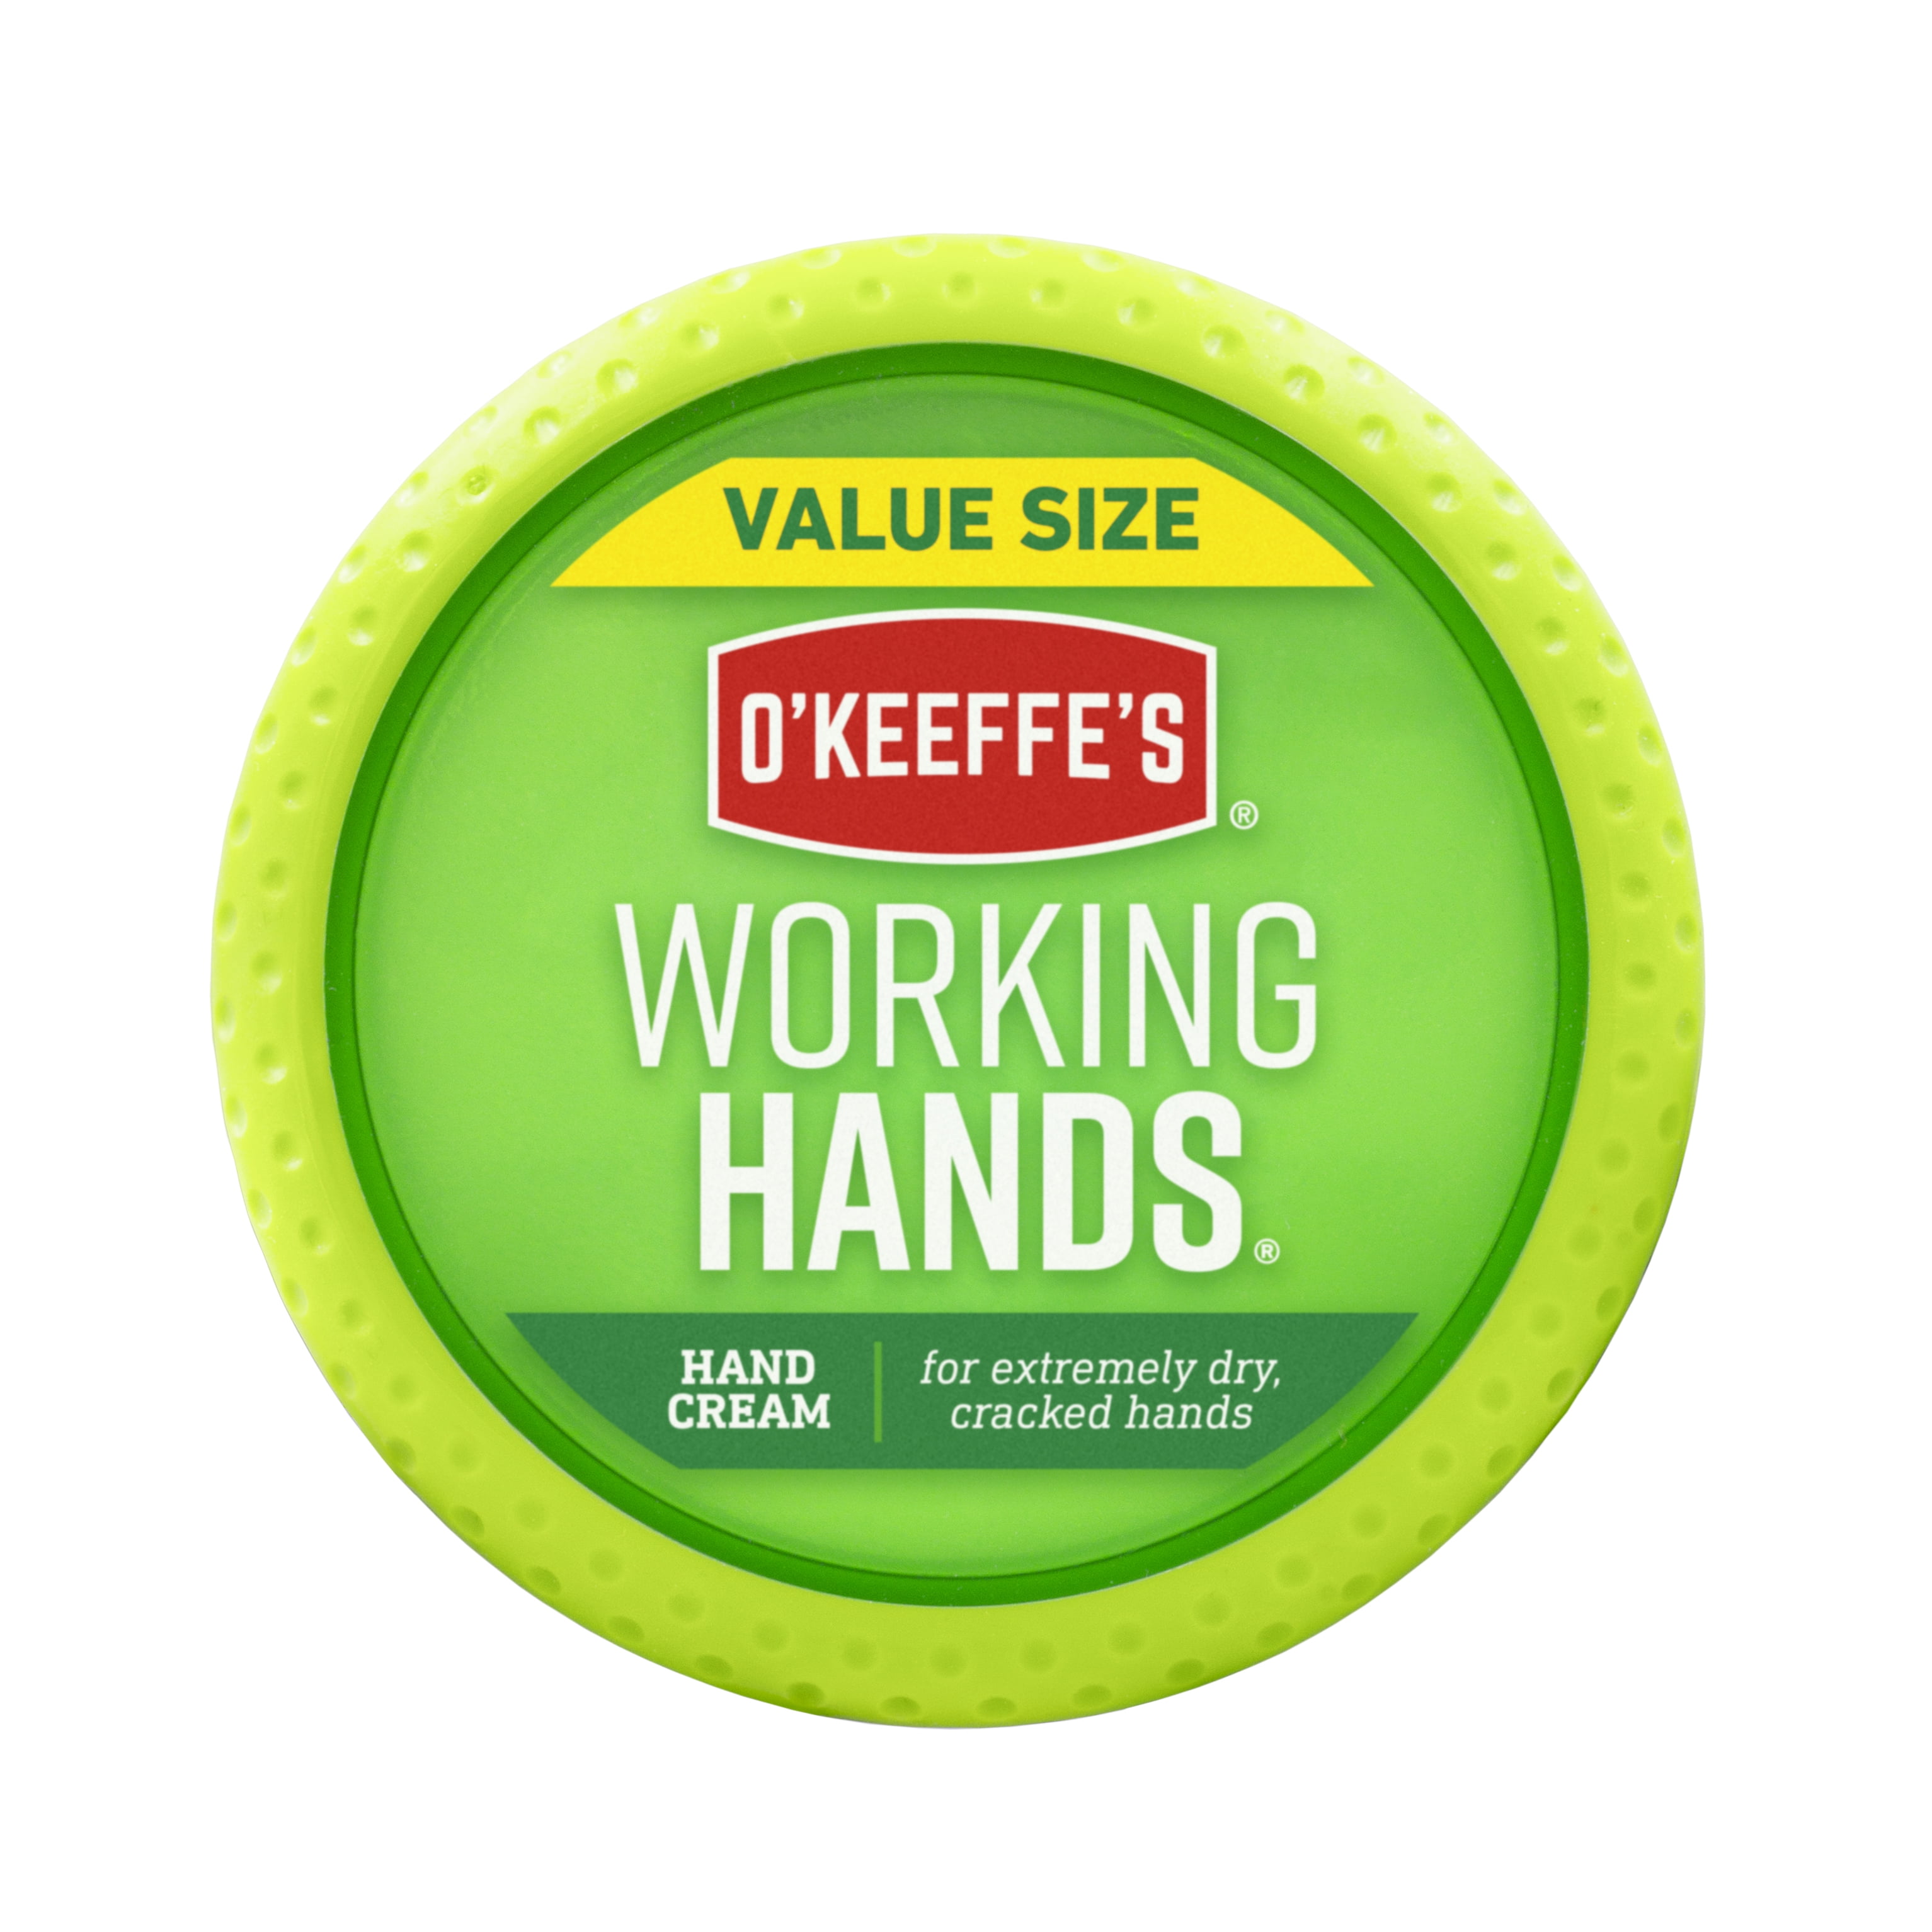 O'Keeffe's Working Hands 5.4 oz. -